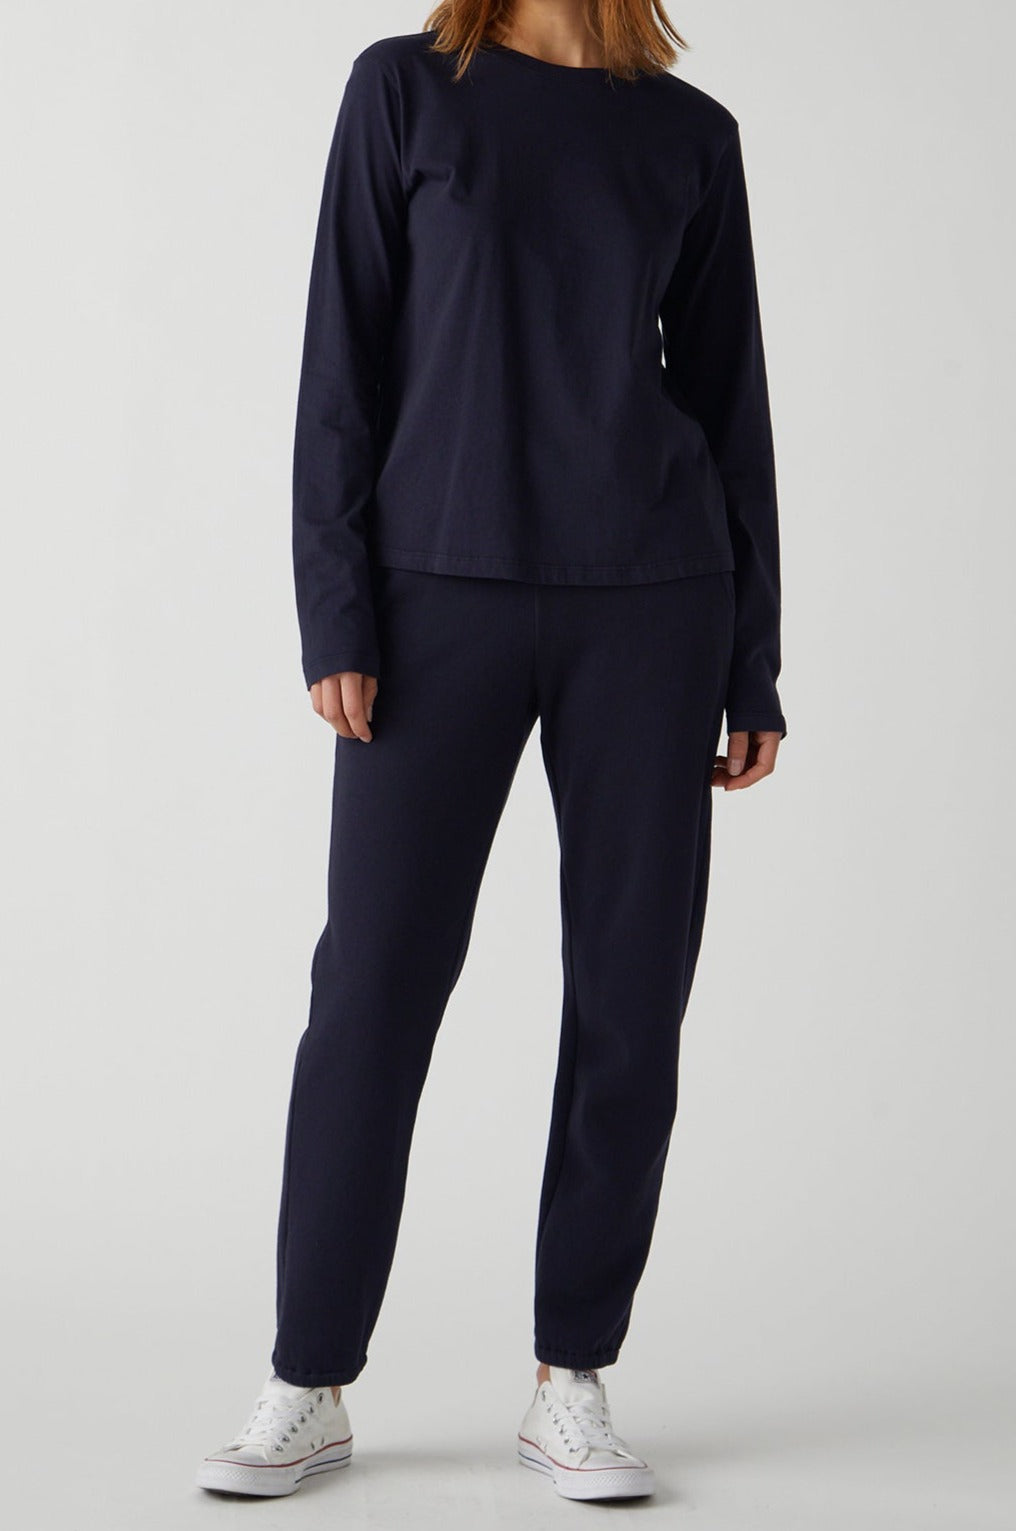   Zuma Sweatpant in navy with Vicente Tee full length front 